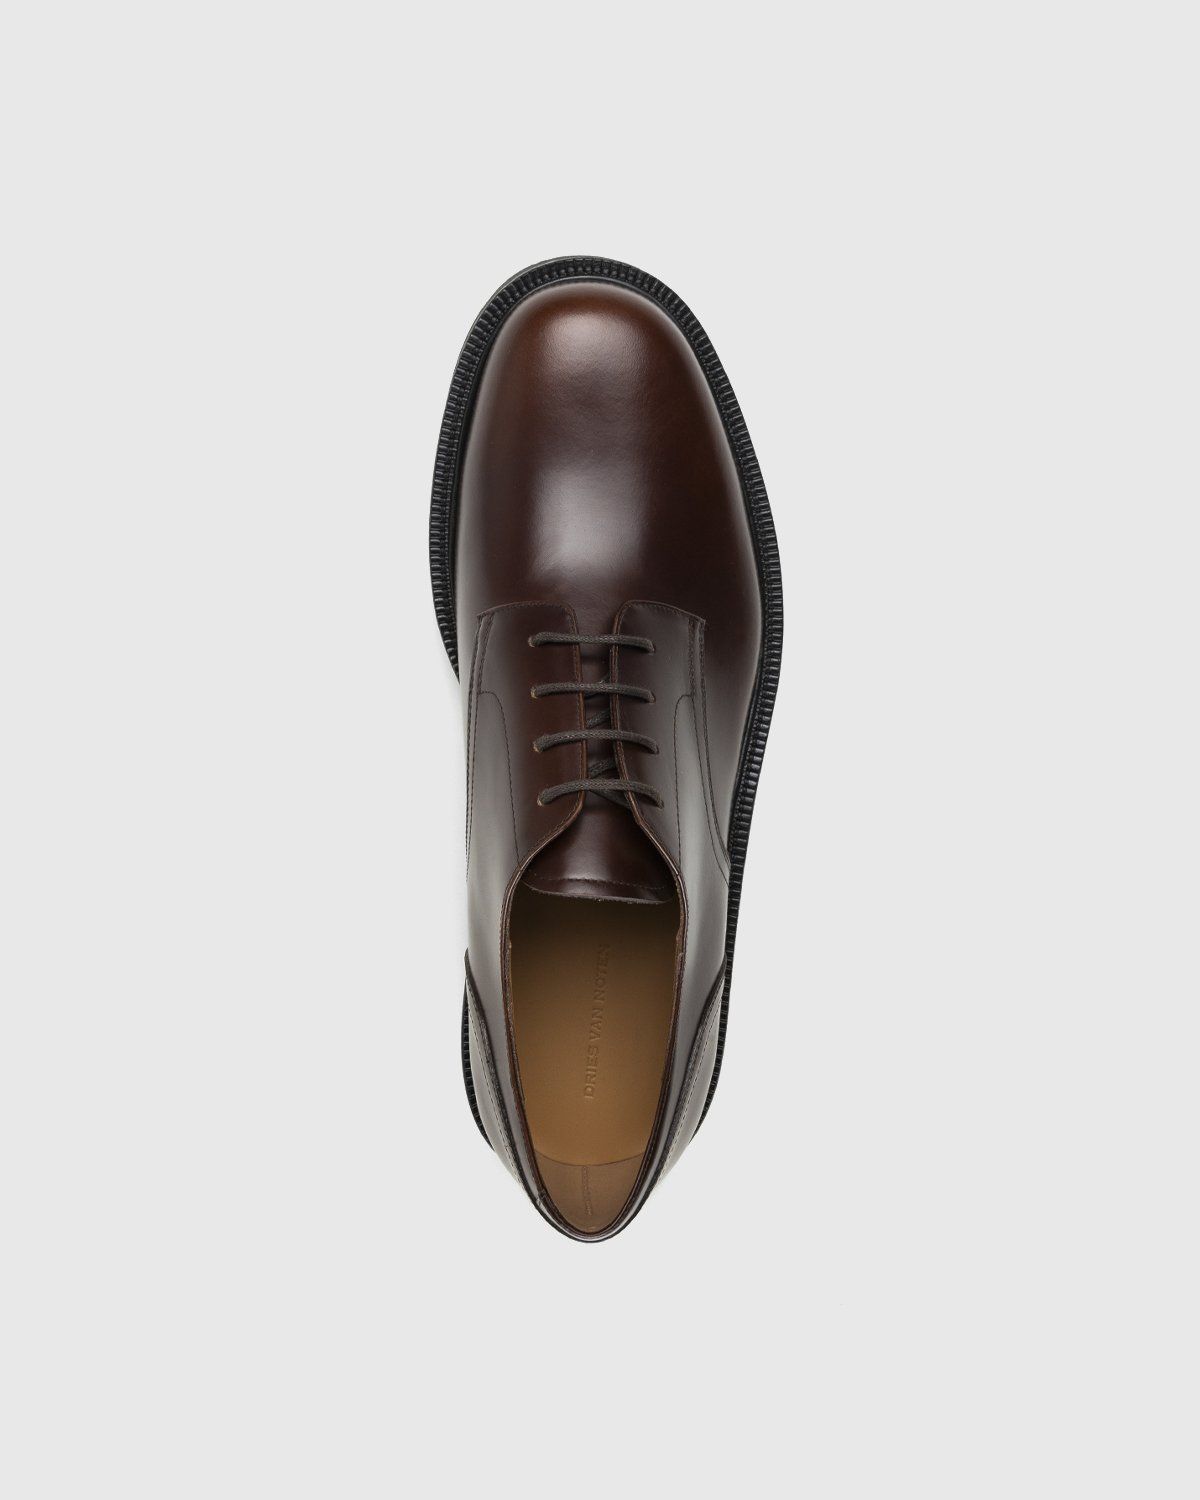 Dries van Noten – Leather Lace-Up Derby Shoes Brown - Oxfords & Lace Ups - Brown - Image 5